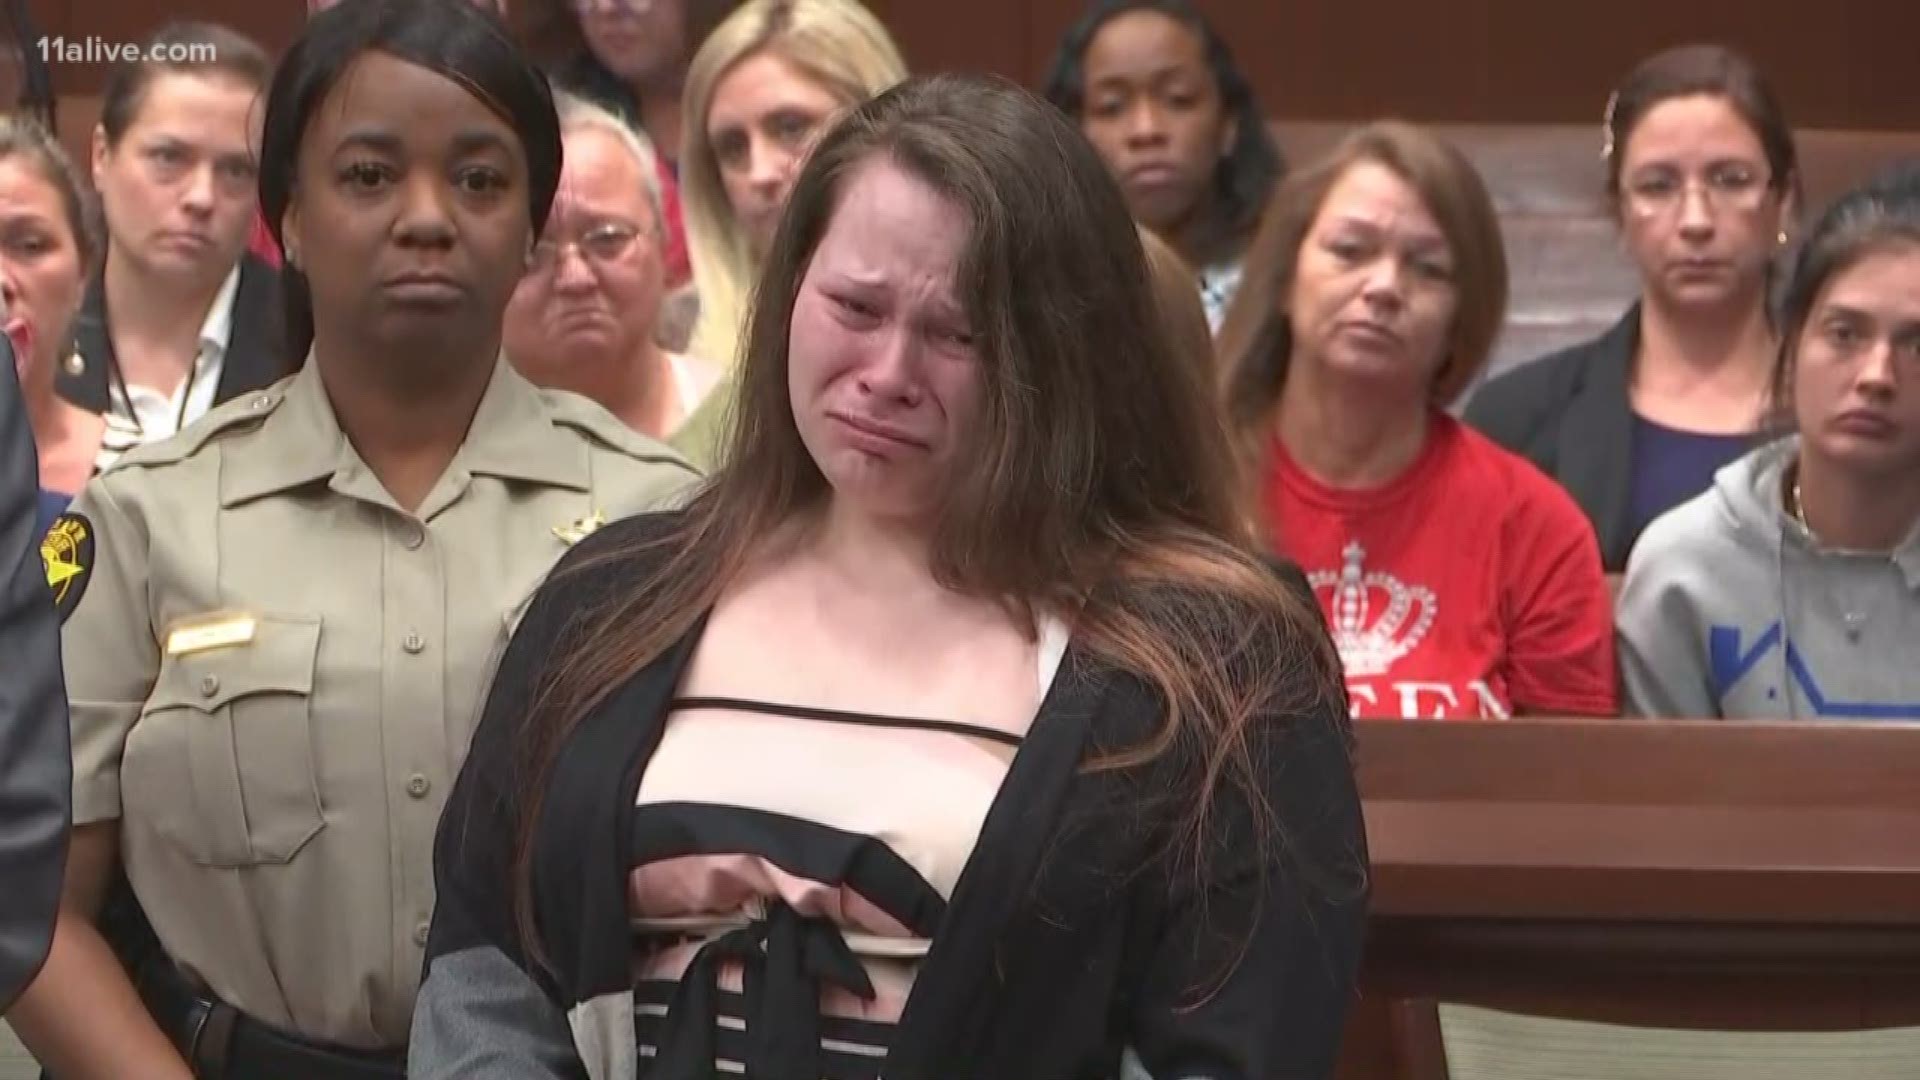 Christopher McNabb and Cortney Bell were found guilty in 2019 of murdering their 2-week-old daughter, Caliyah. Bell's murder conviction has now been reversed.